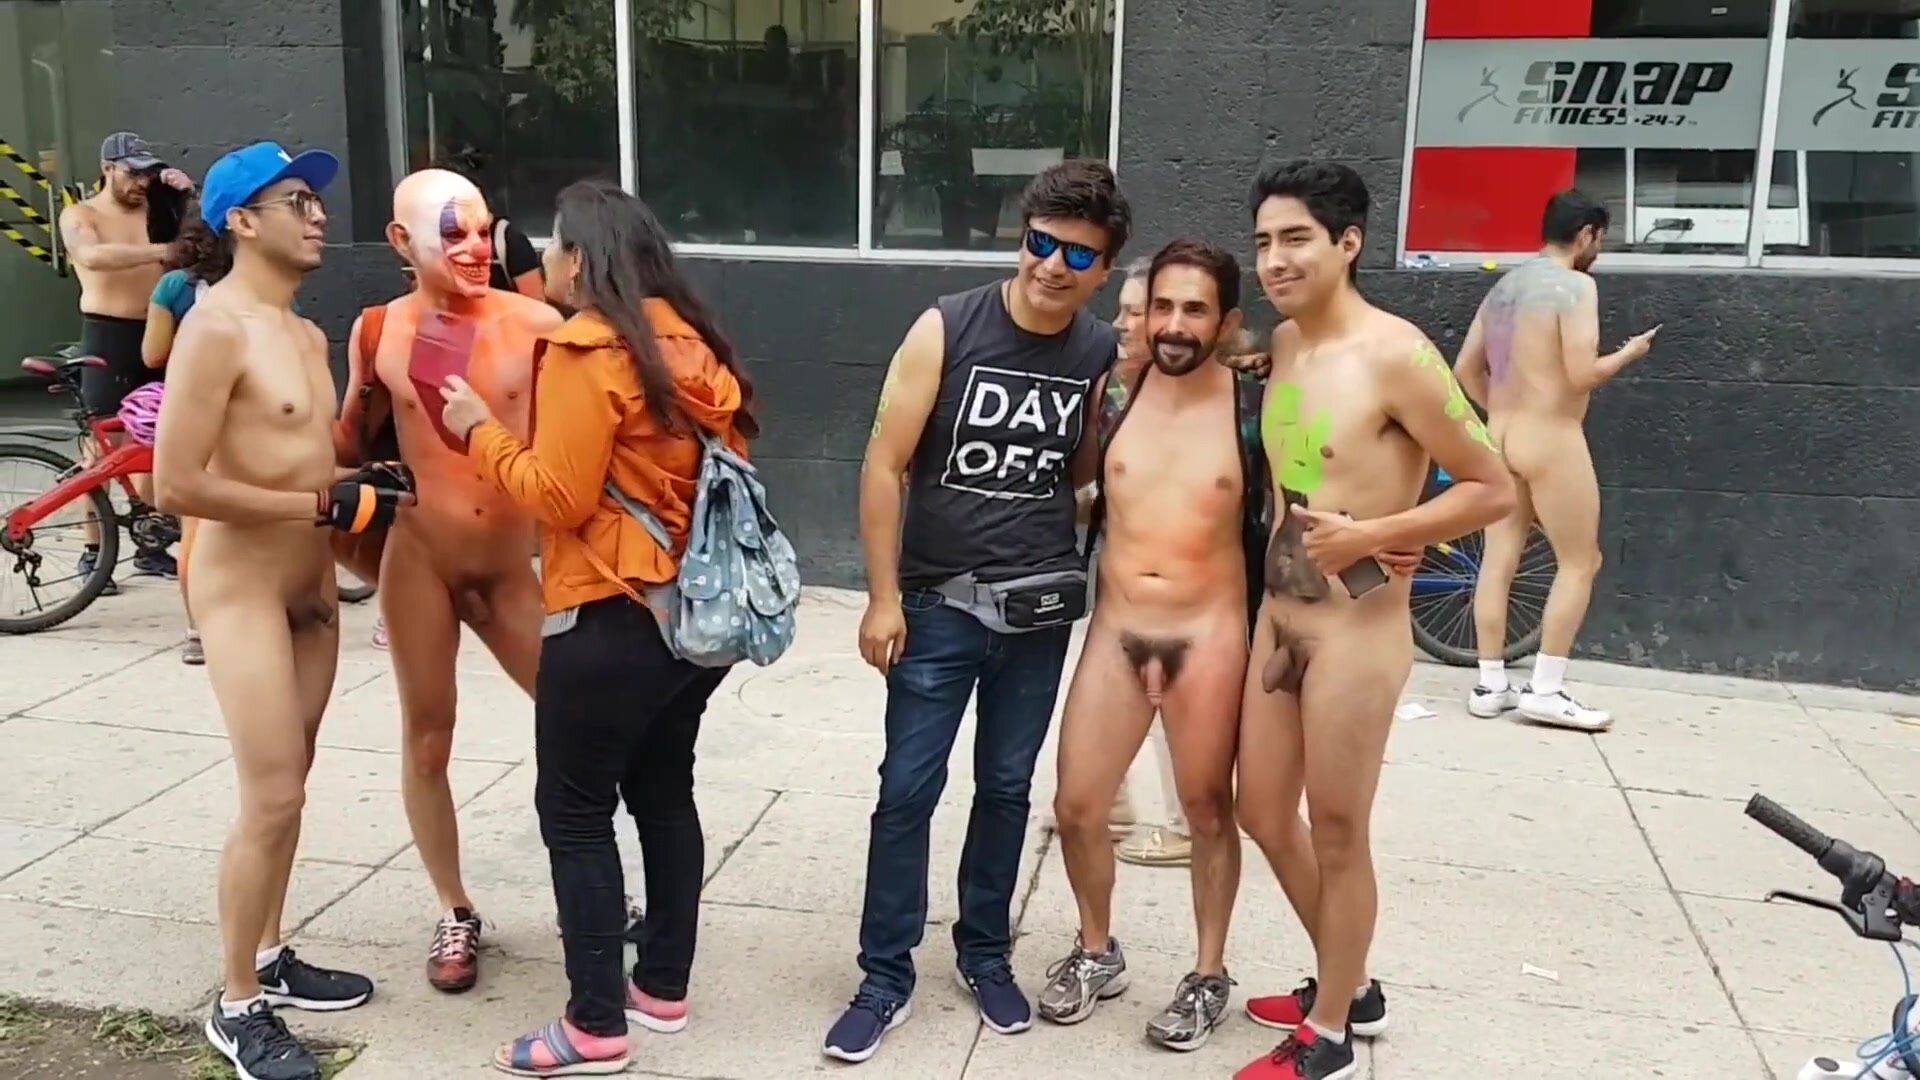 Naked parade in Mexico [HD]